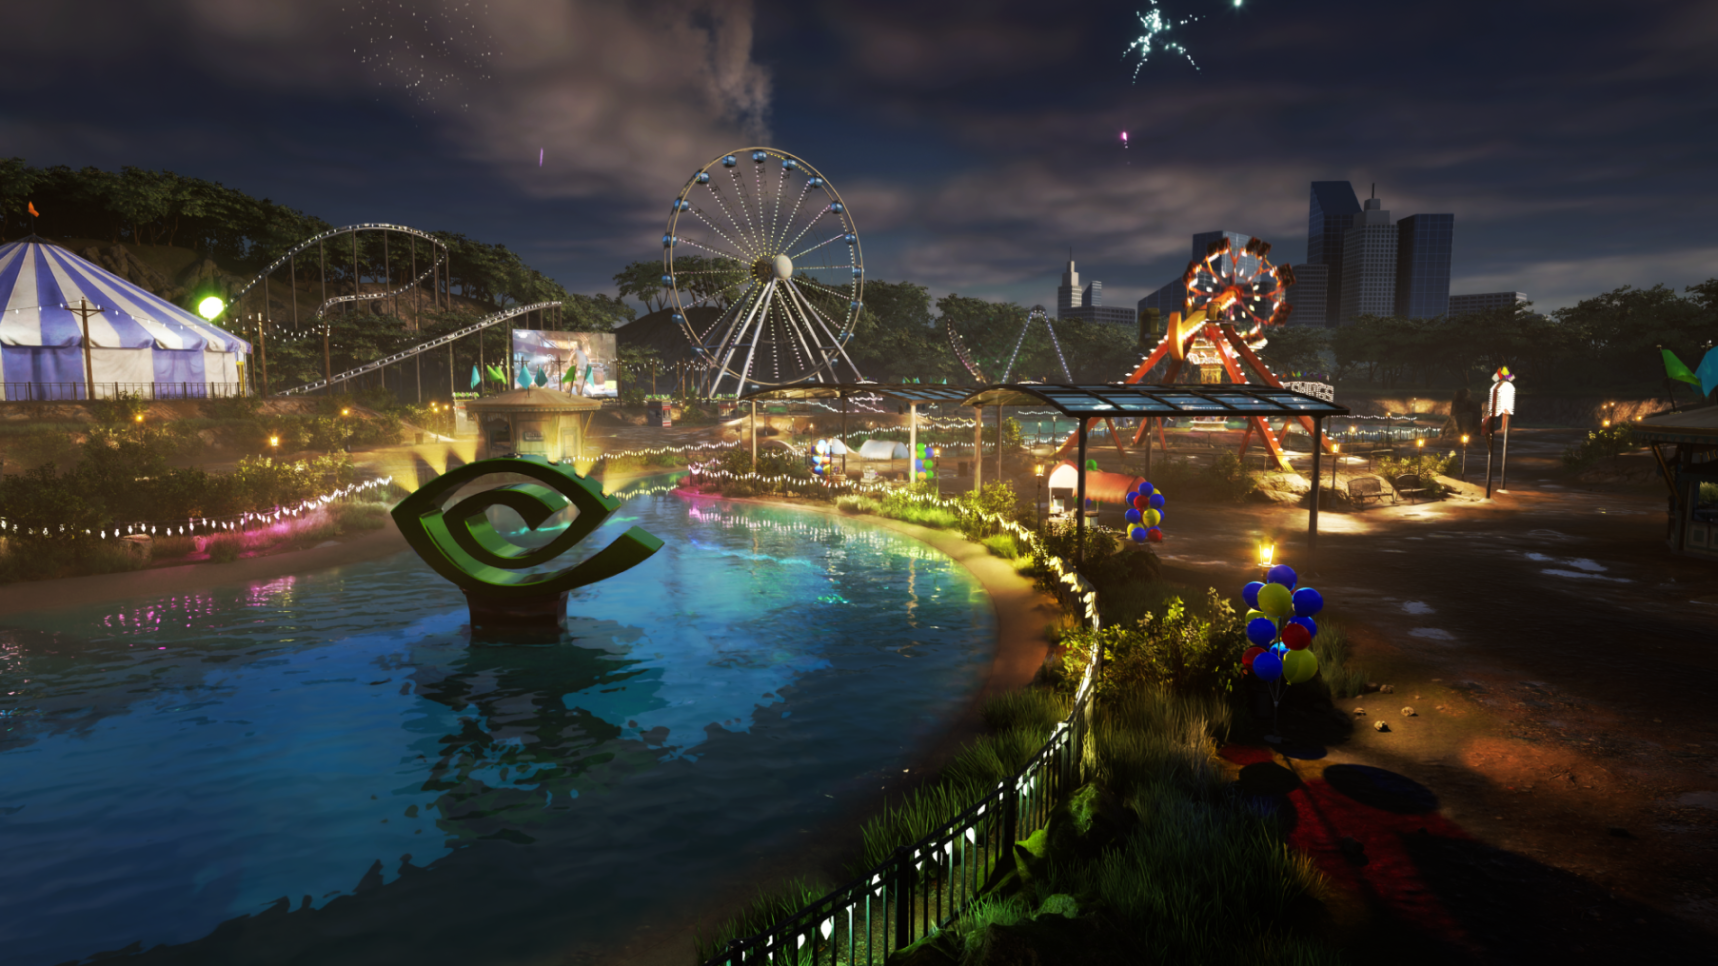 Rich image of a carnival at night, with the NVIDIA logo as a pond sculpture in the foreground.